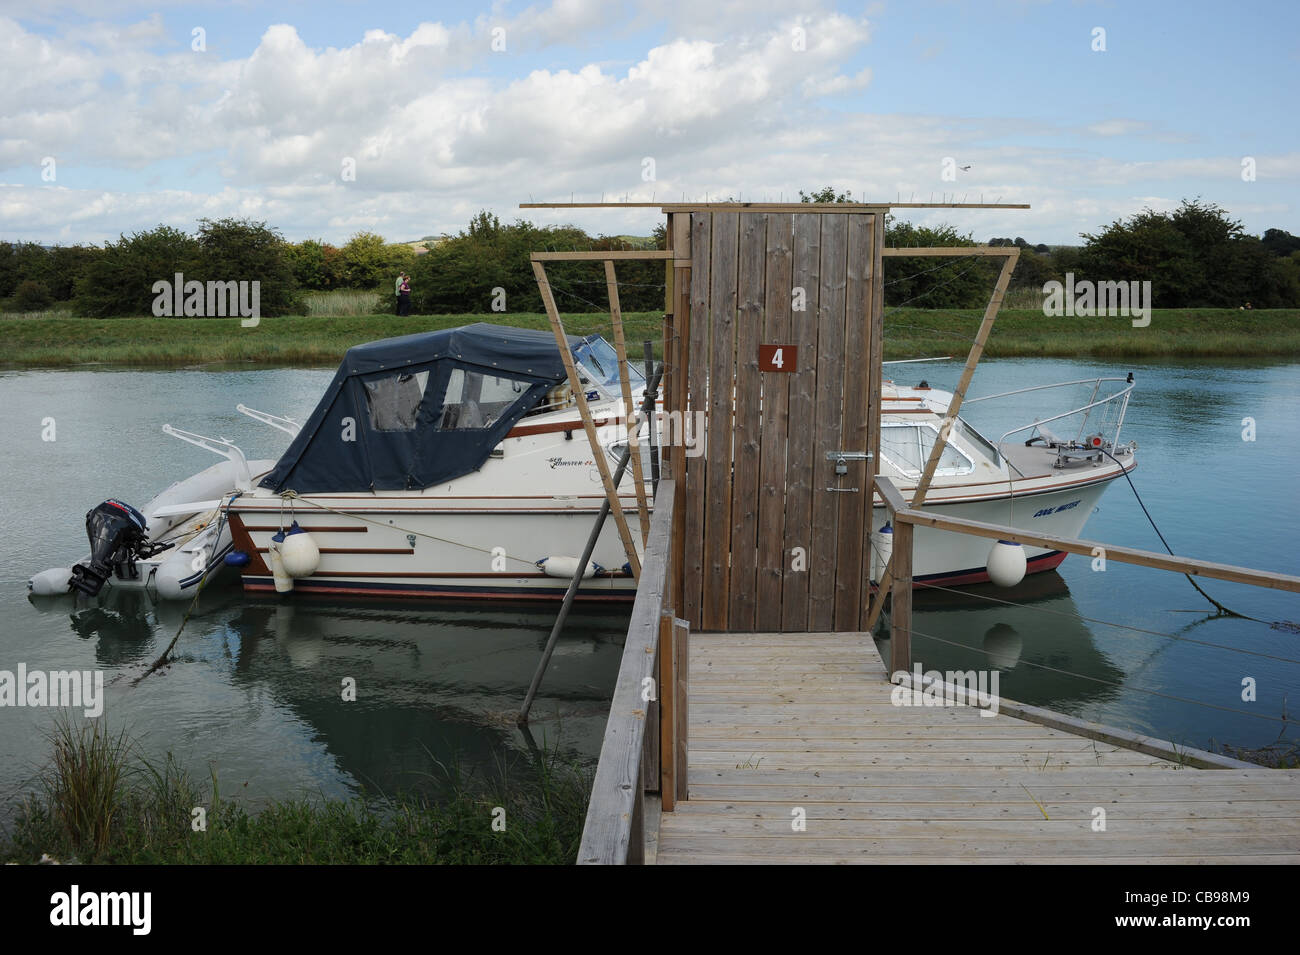 Boat Moored on the River Arun, Arundel, West Sussex, UK Stock Photo